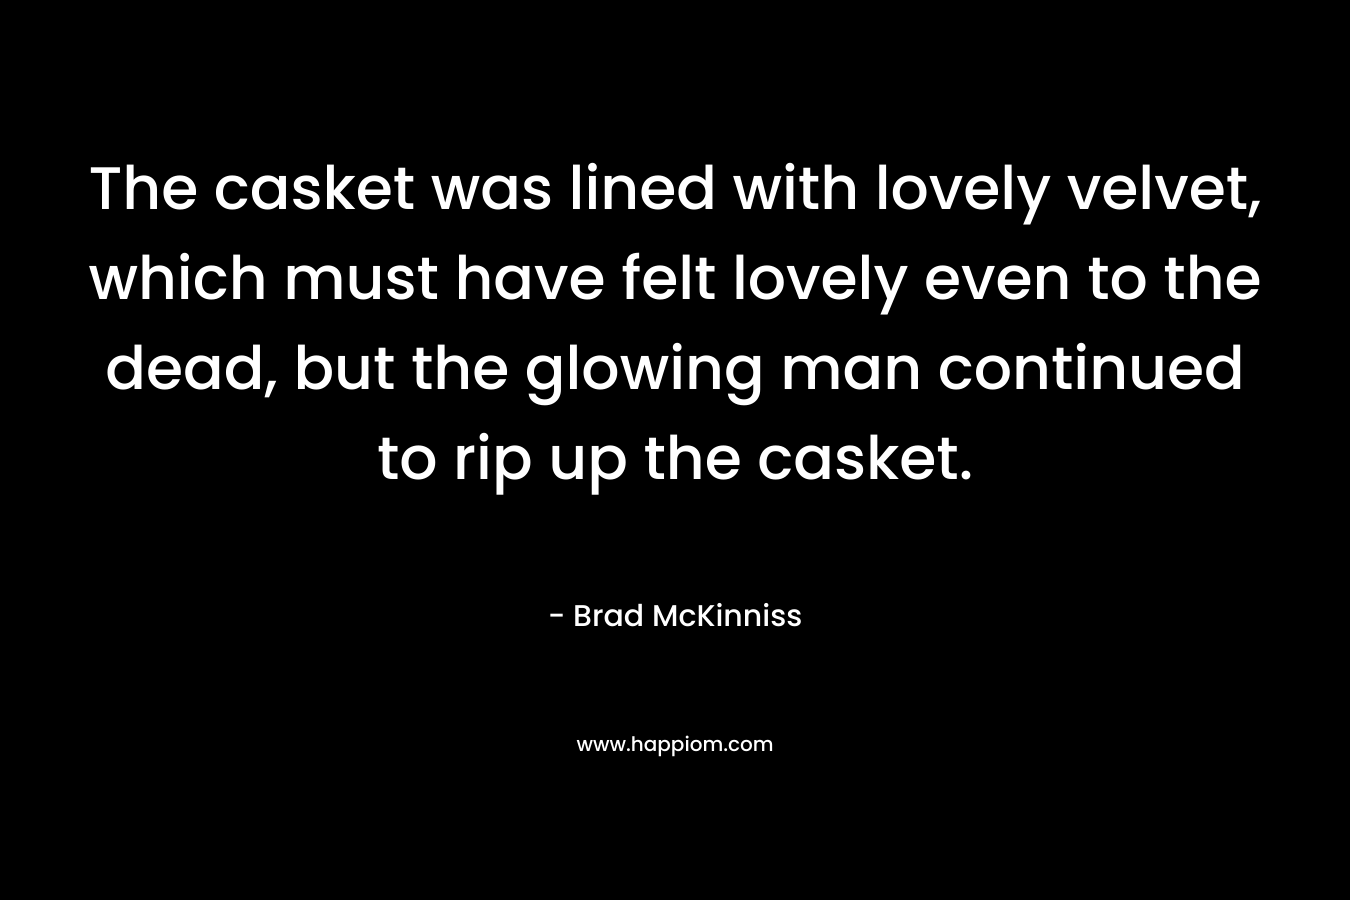 The casket was lined with lovely velvet, which must have felt lovely even to the dead, but the glowing man continued to rip up the casket.